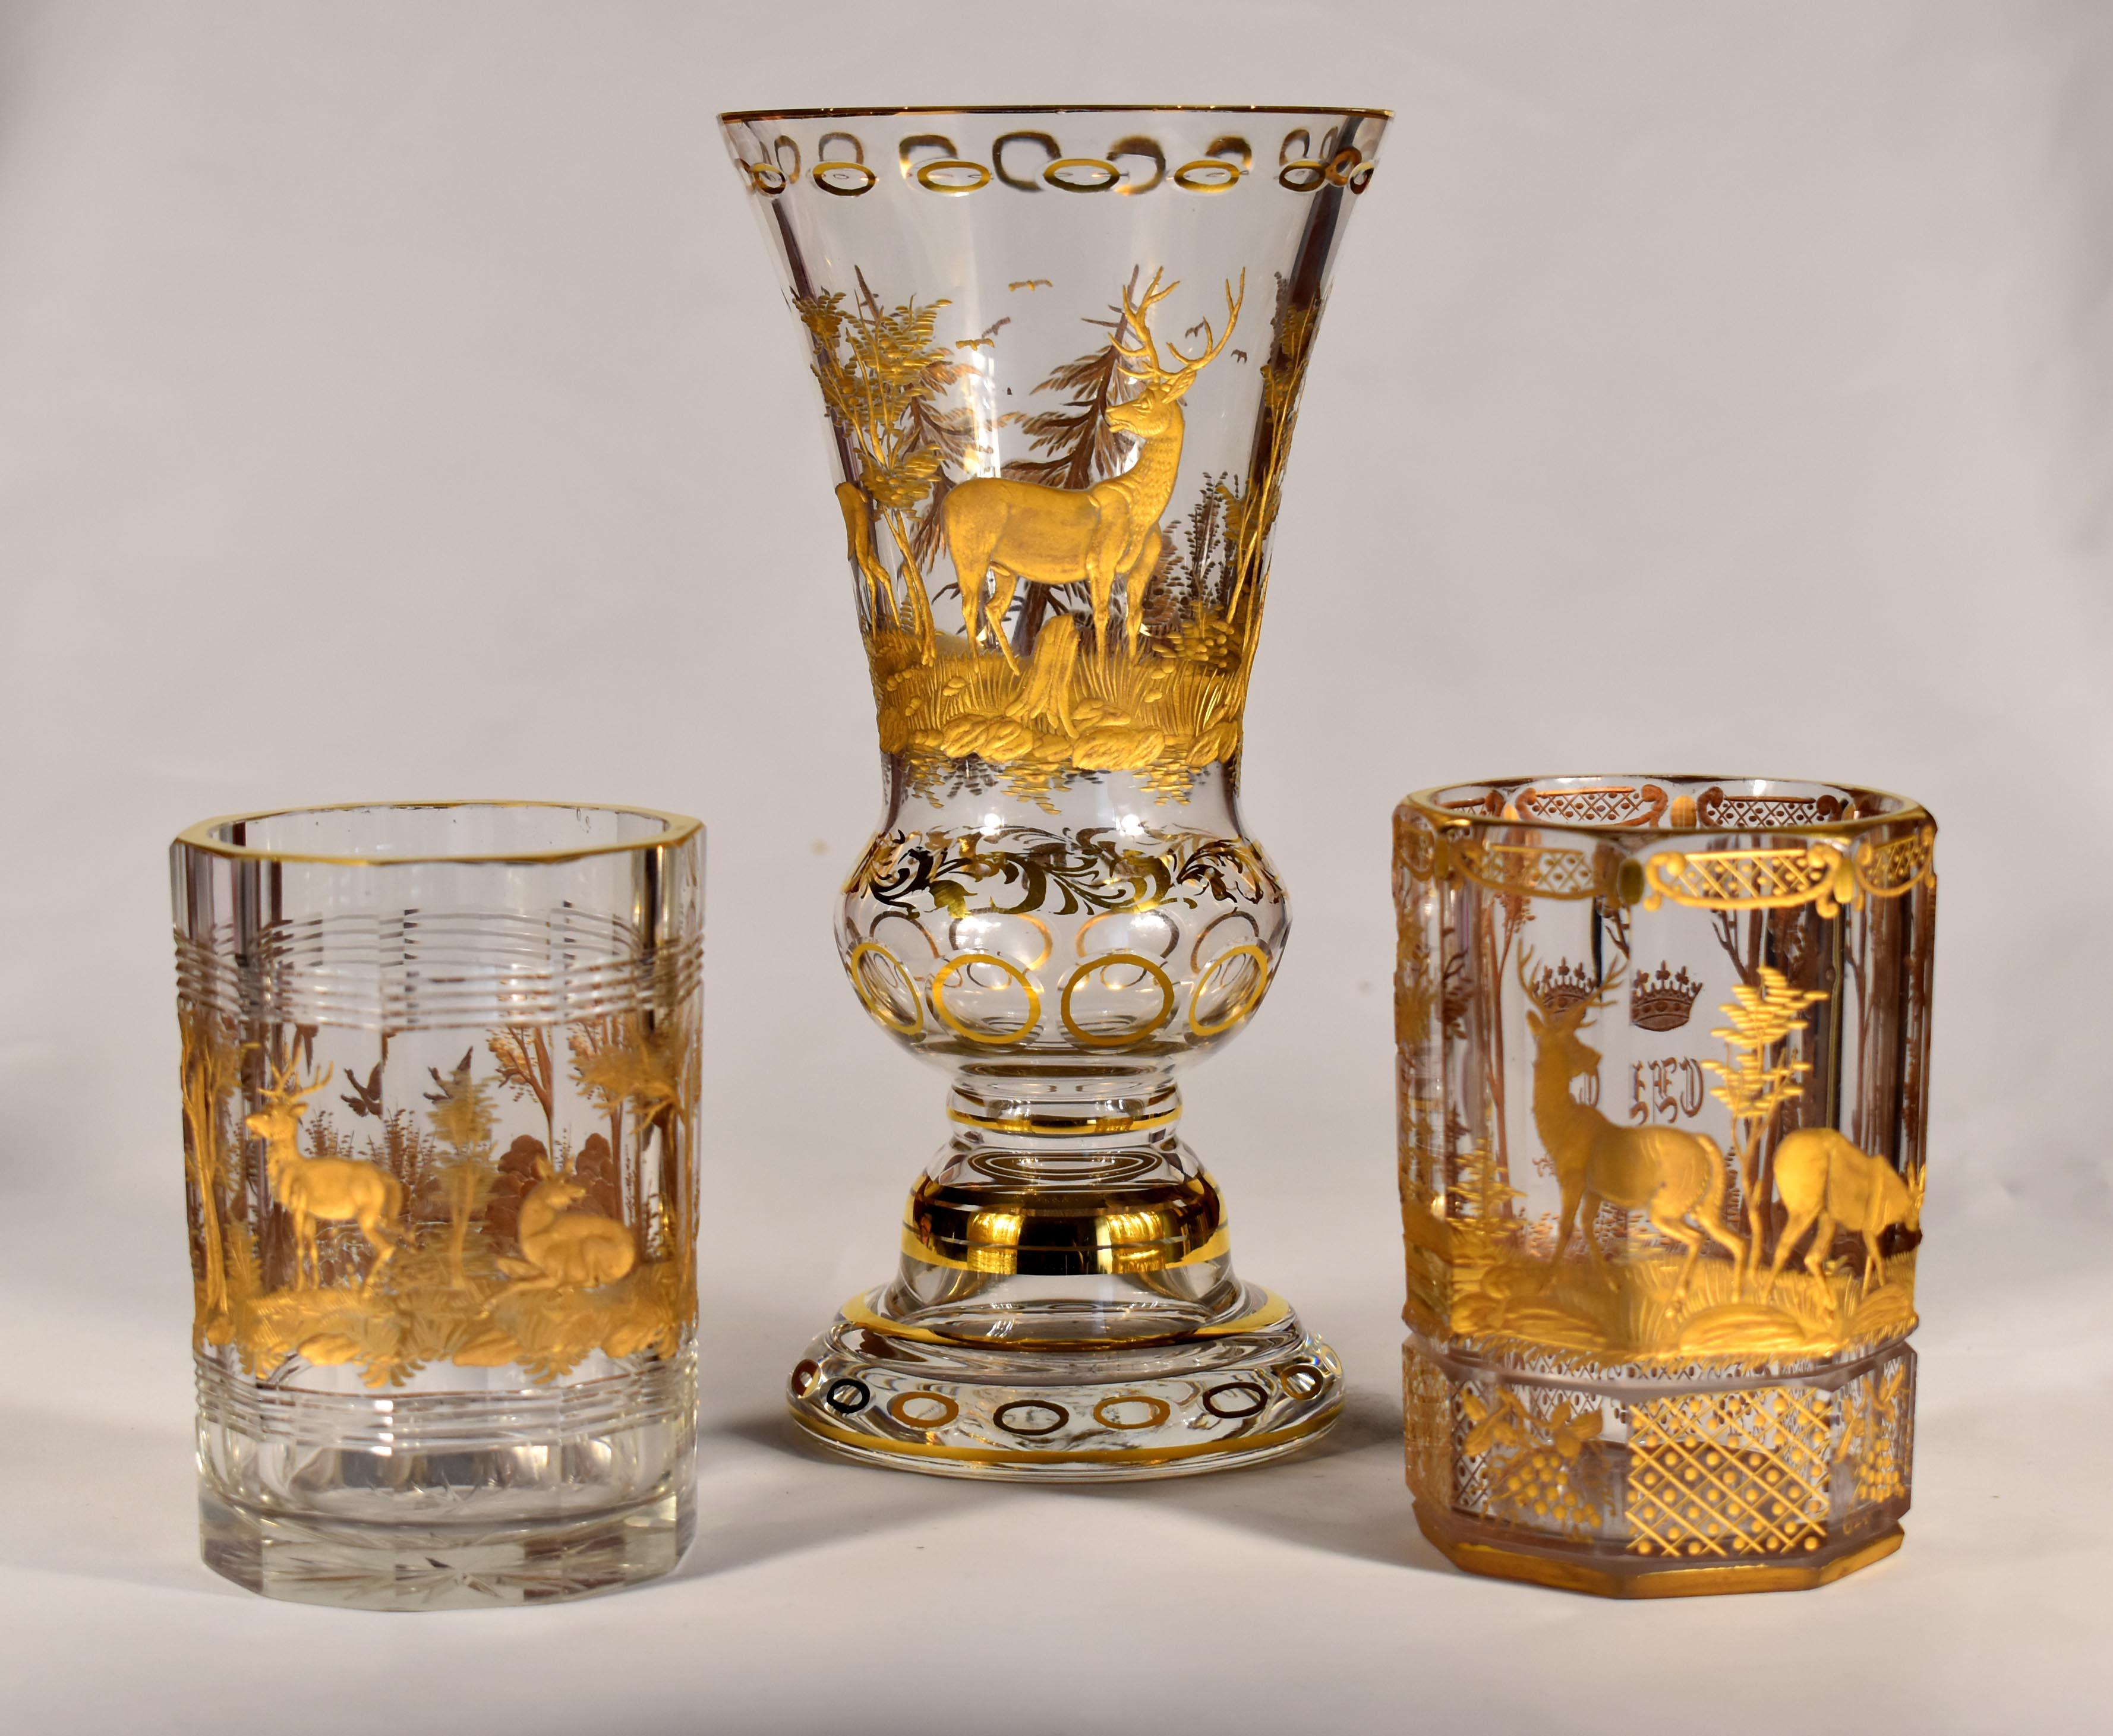 Convolute of three pieces of glass, This is a clear glass vase, Engraved hunting motif, The engraving is gilded. then two cut glasses also with an engraved hunting motif and then gilded, One of the glasses has an engraved and gilded noble crown with